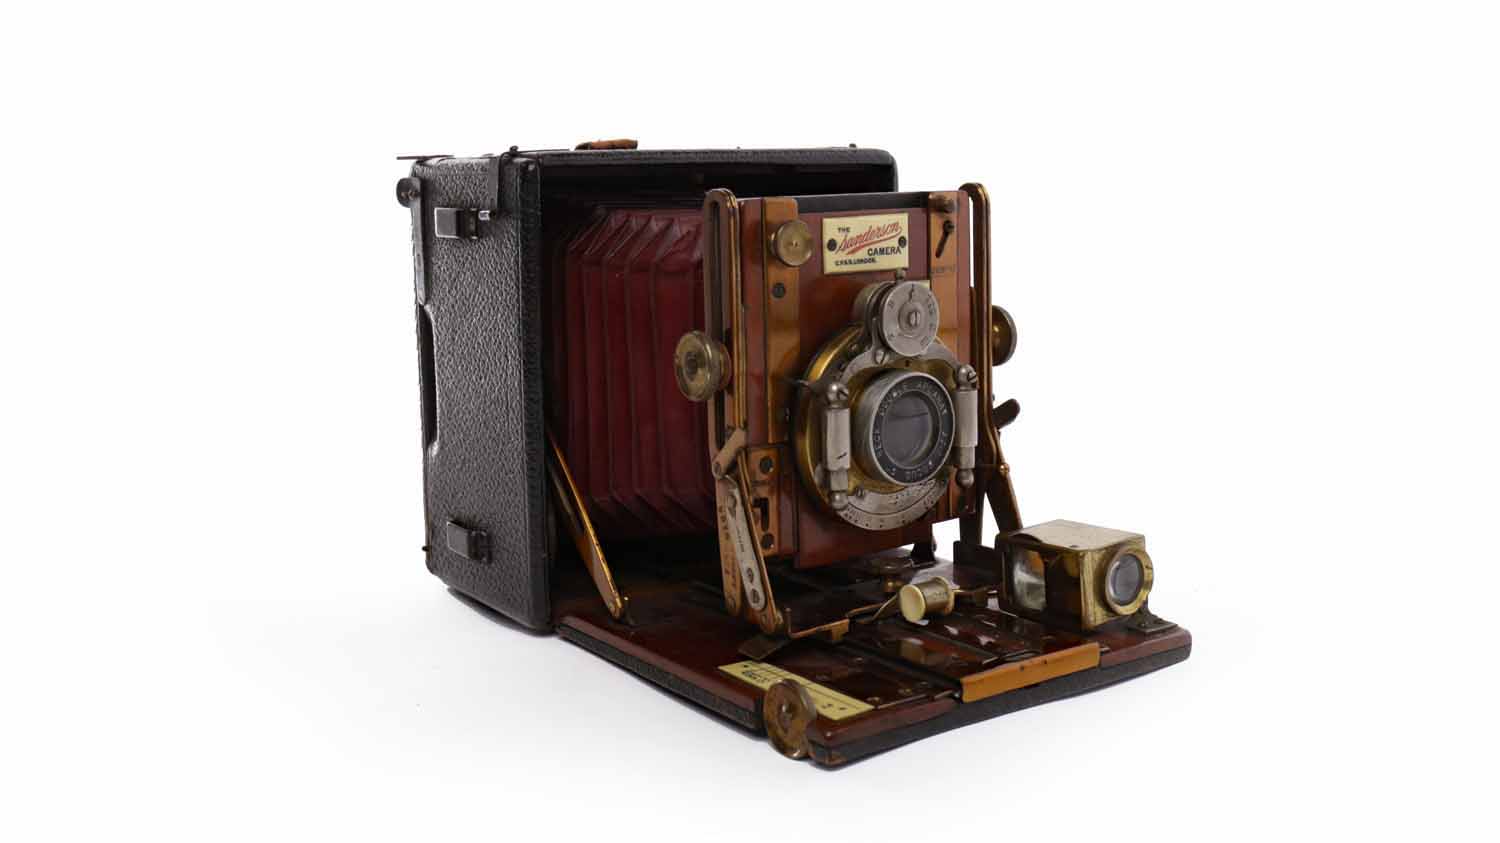 SANDERSON VICTORIAN PLATE CAMERA by C.H.& S. London, with 6" Beck Doube Aplanat lens F 7.